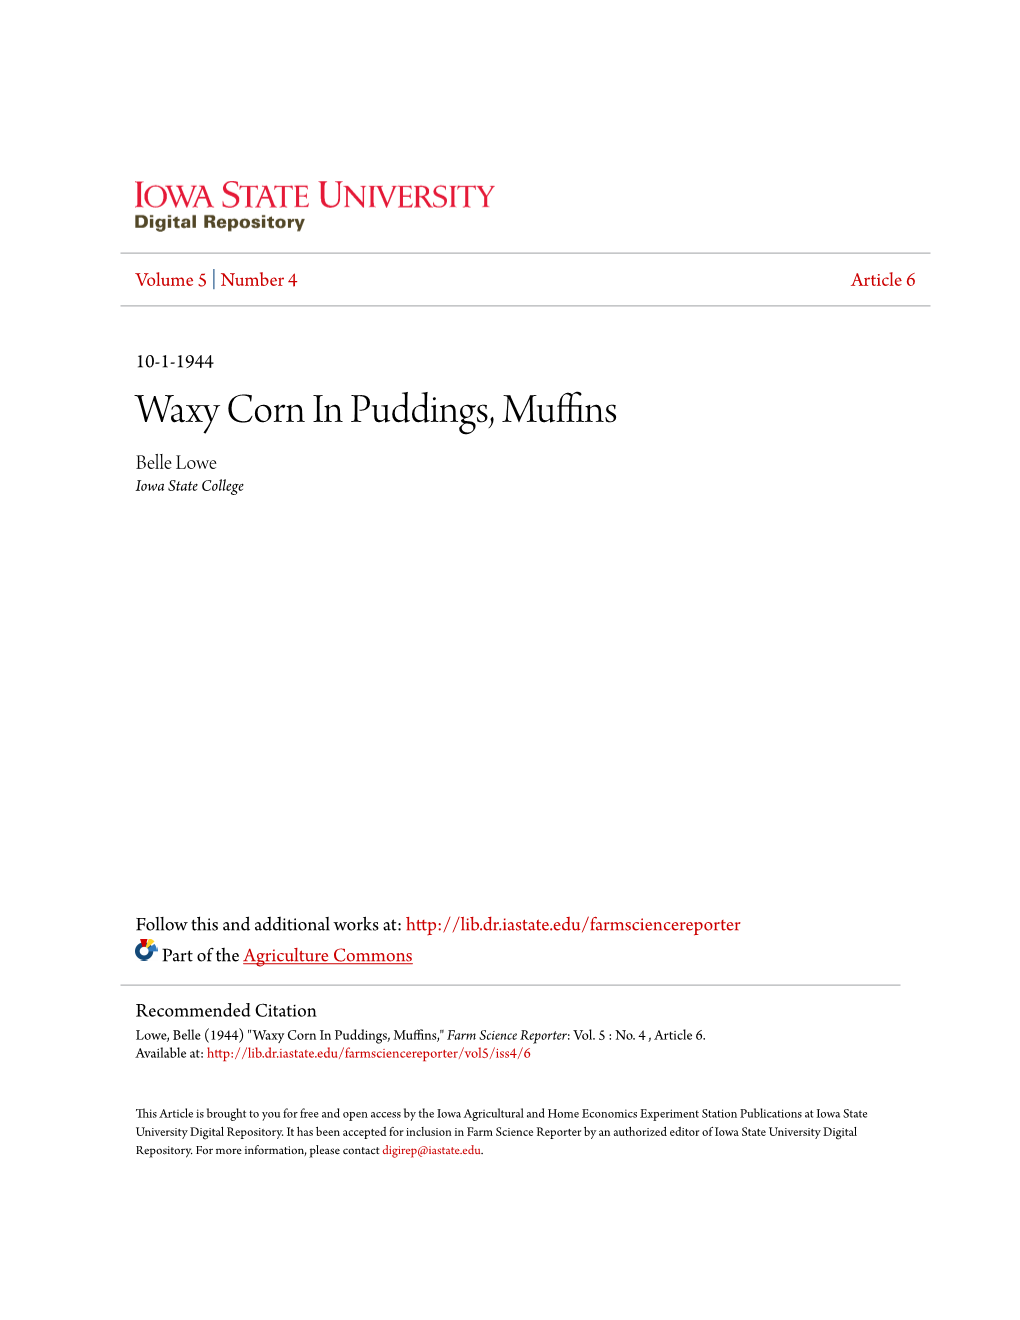 Waxy Corn in Puddings, Muffins Belle Lowe Iowa State College